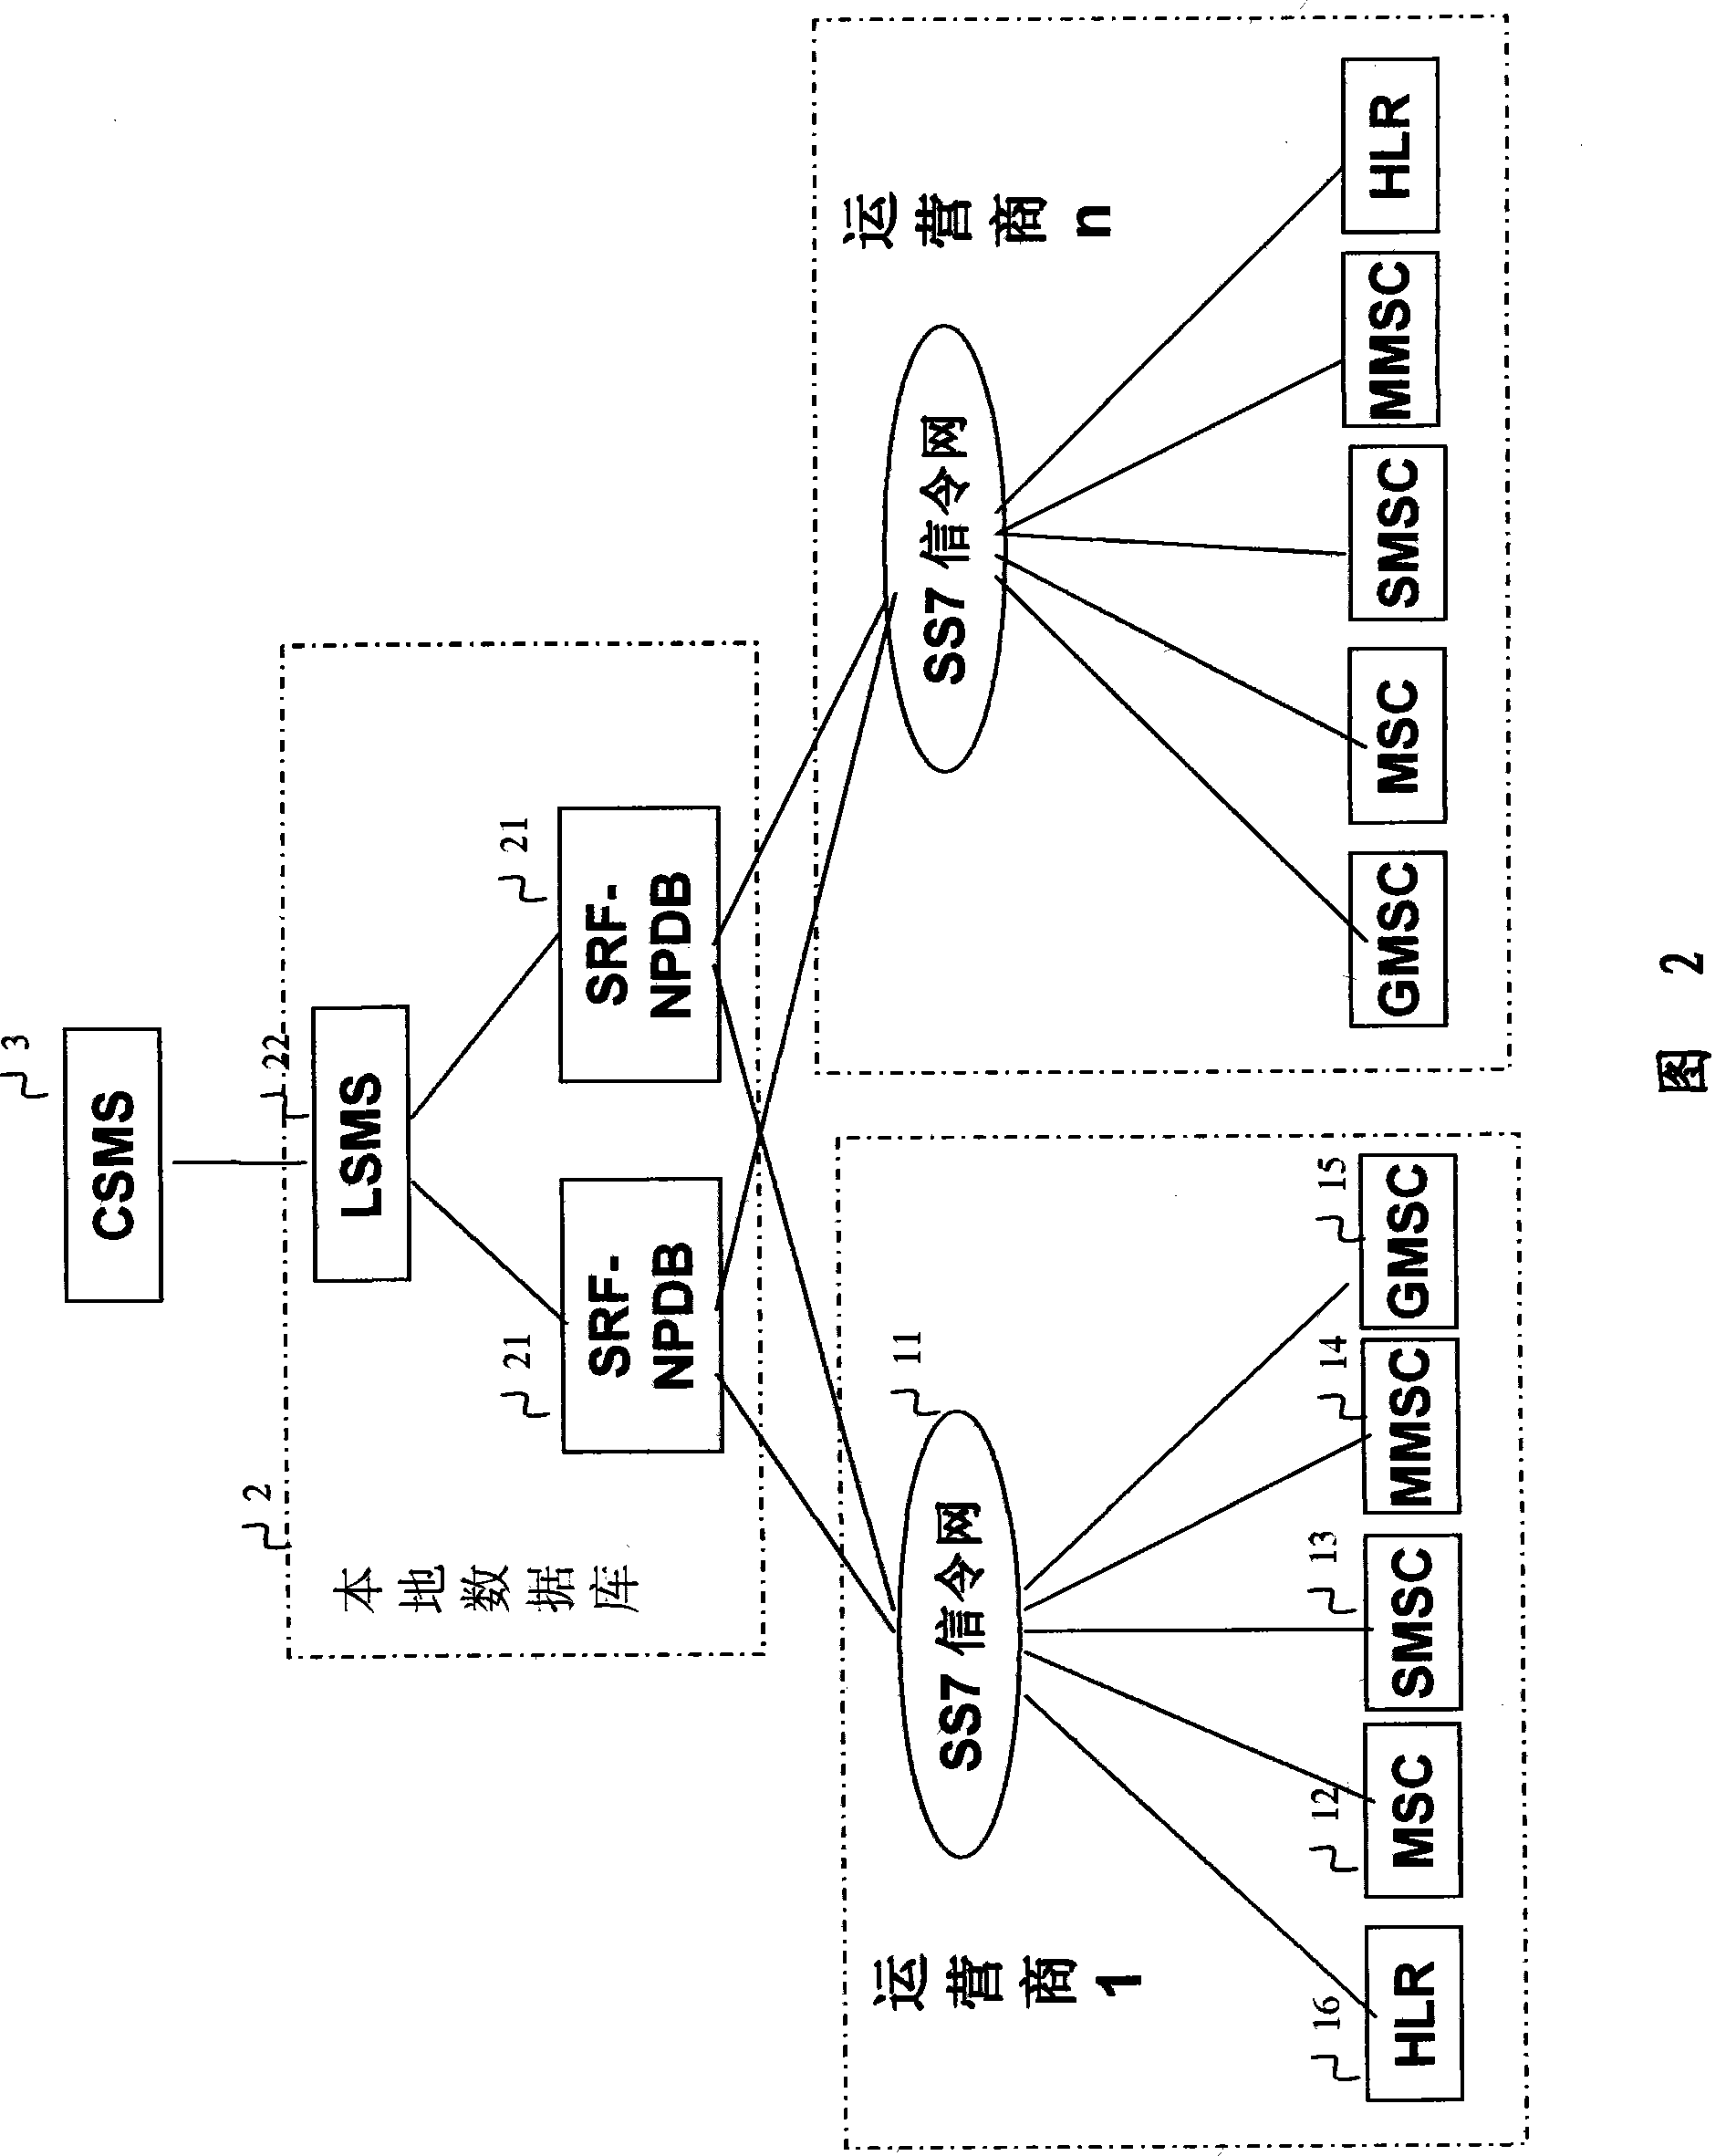 System and method for realizing number carryover service between mobile networks